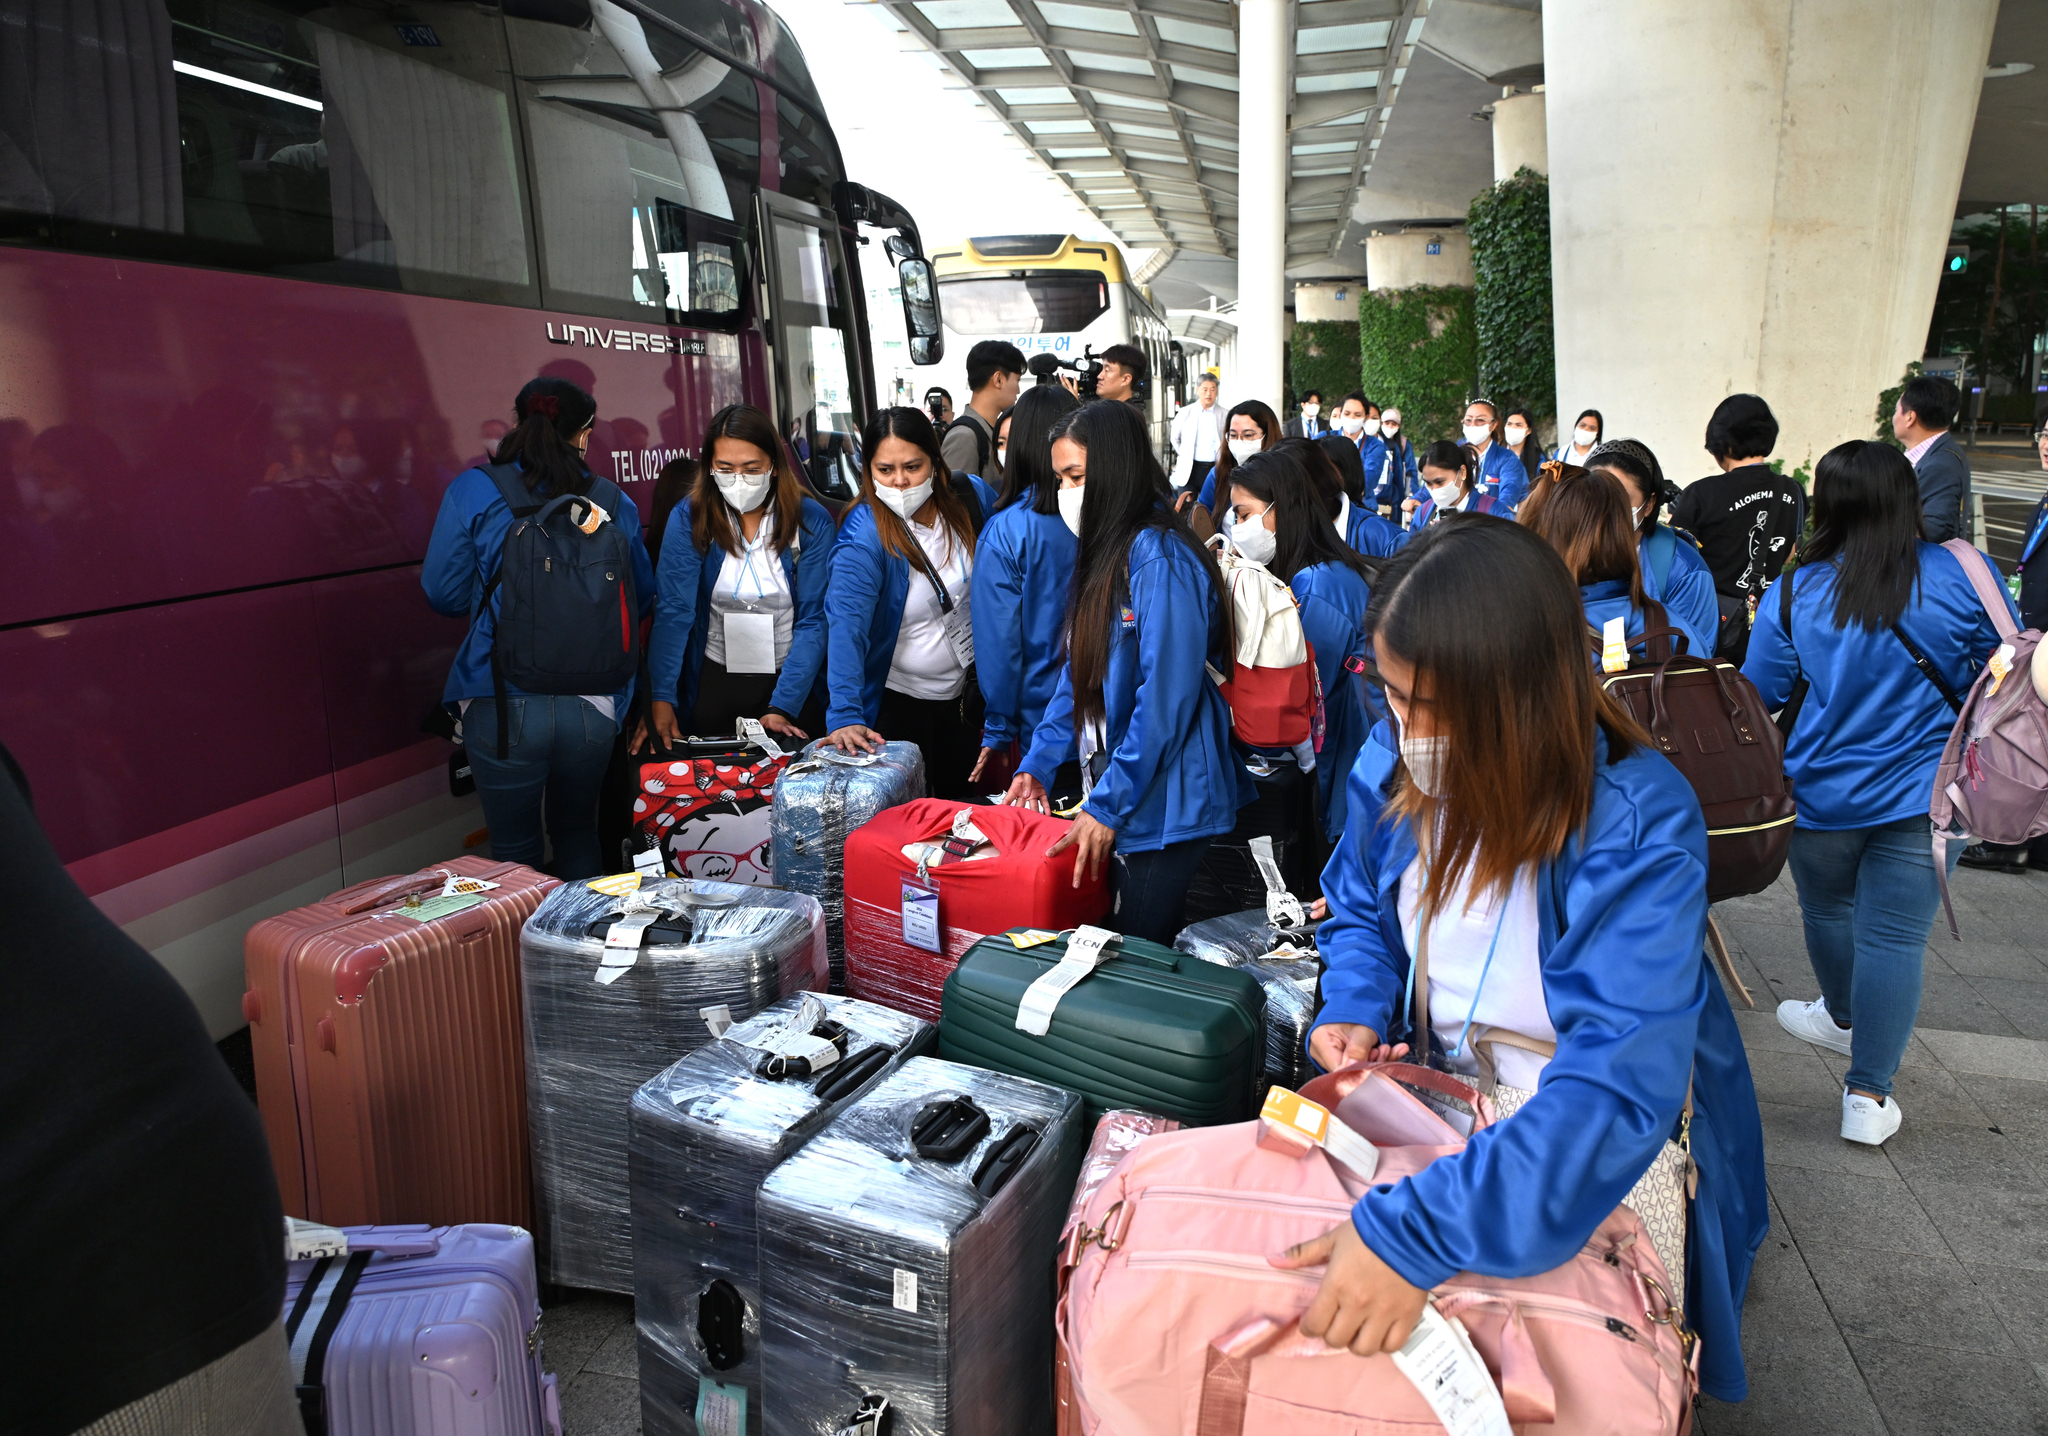 Filipino caregivers sort their luggage before boarding a bus provided by the Seoul city government at Incheon International Airport on Tuesday. [SEOUL METROPOLITAN GOVERNMENT]